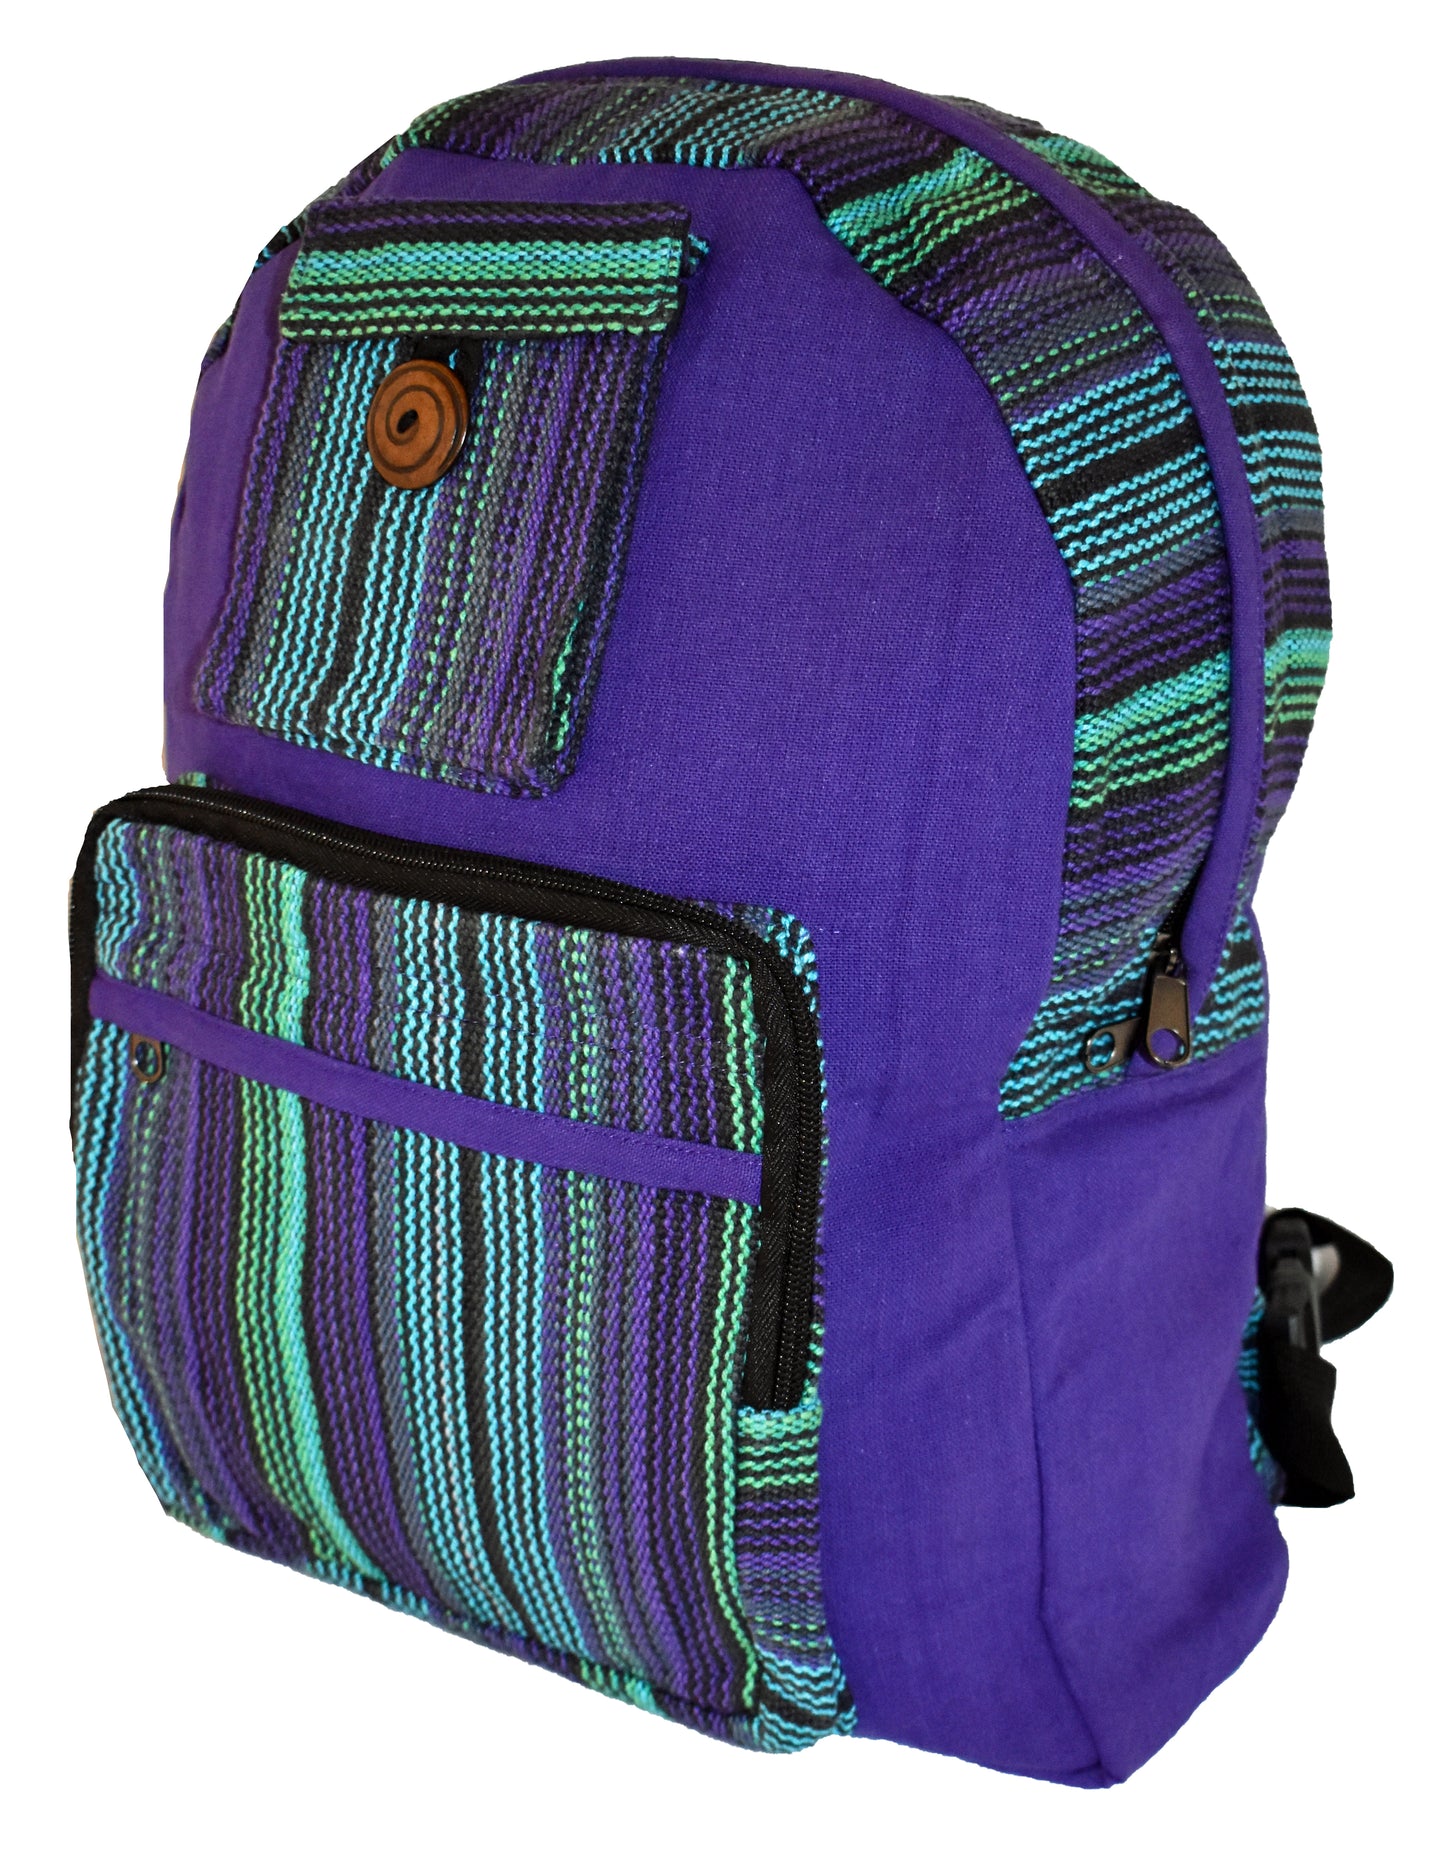 Striped Cotton Back Pack